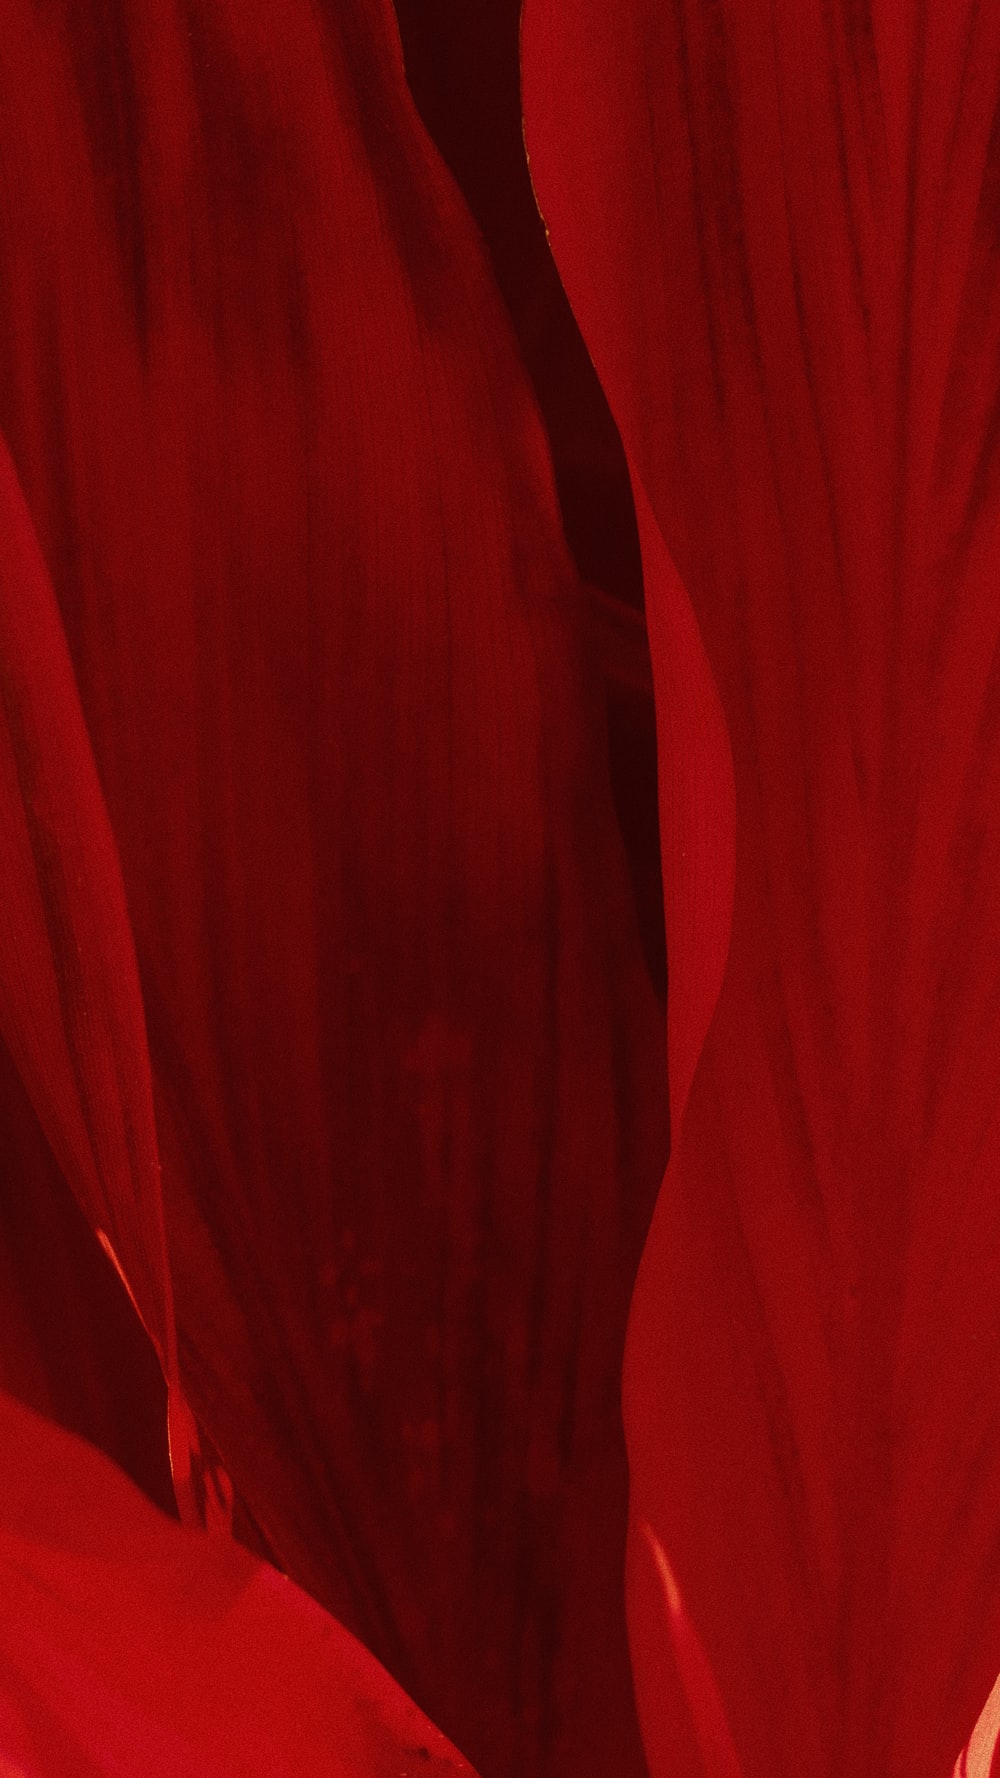 Red Silk Picture. Download Free Image